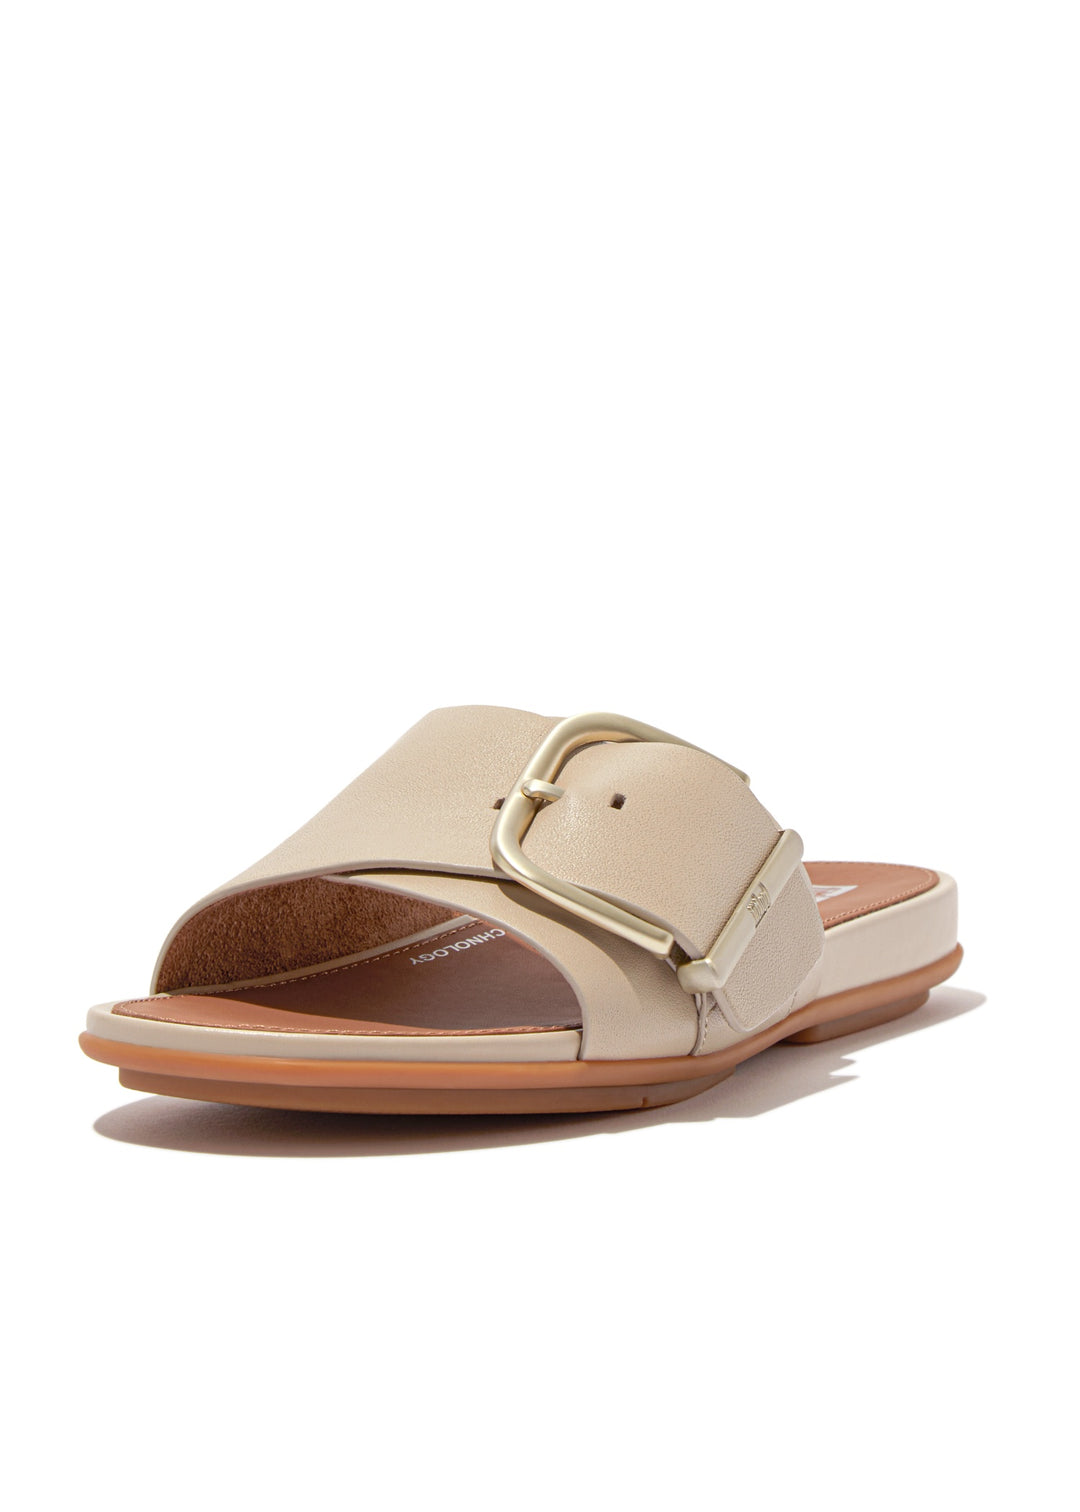 Fitflop - Gracie Maxi Buckle Leather Slides